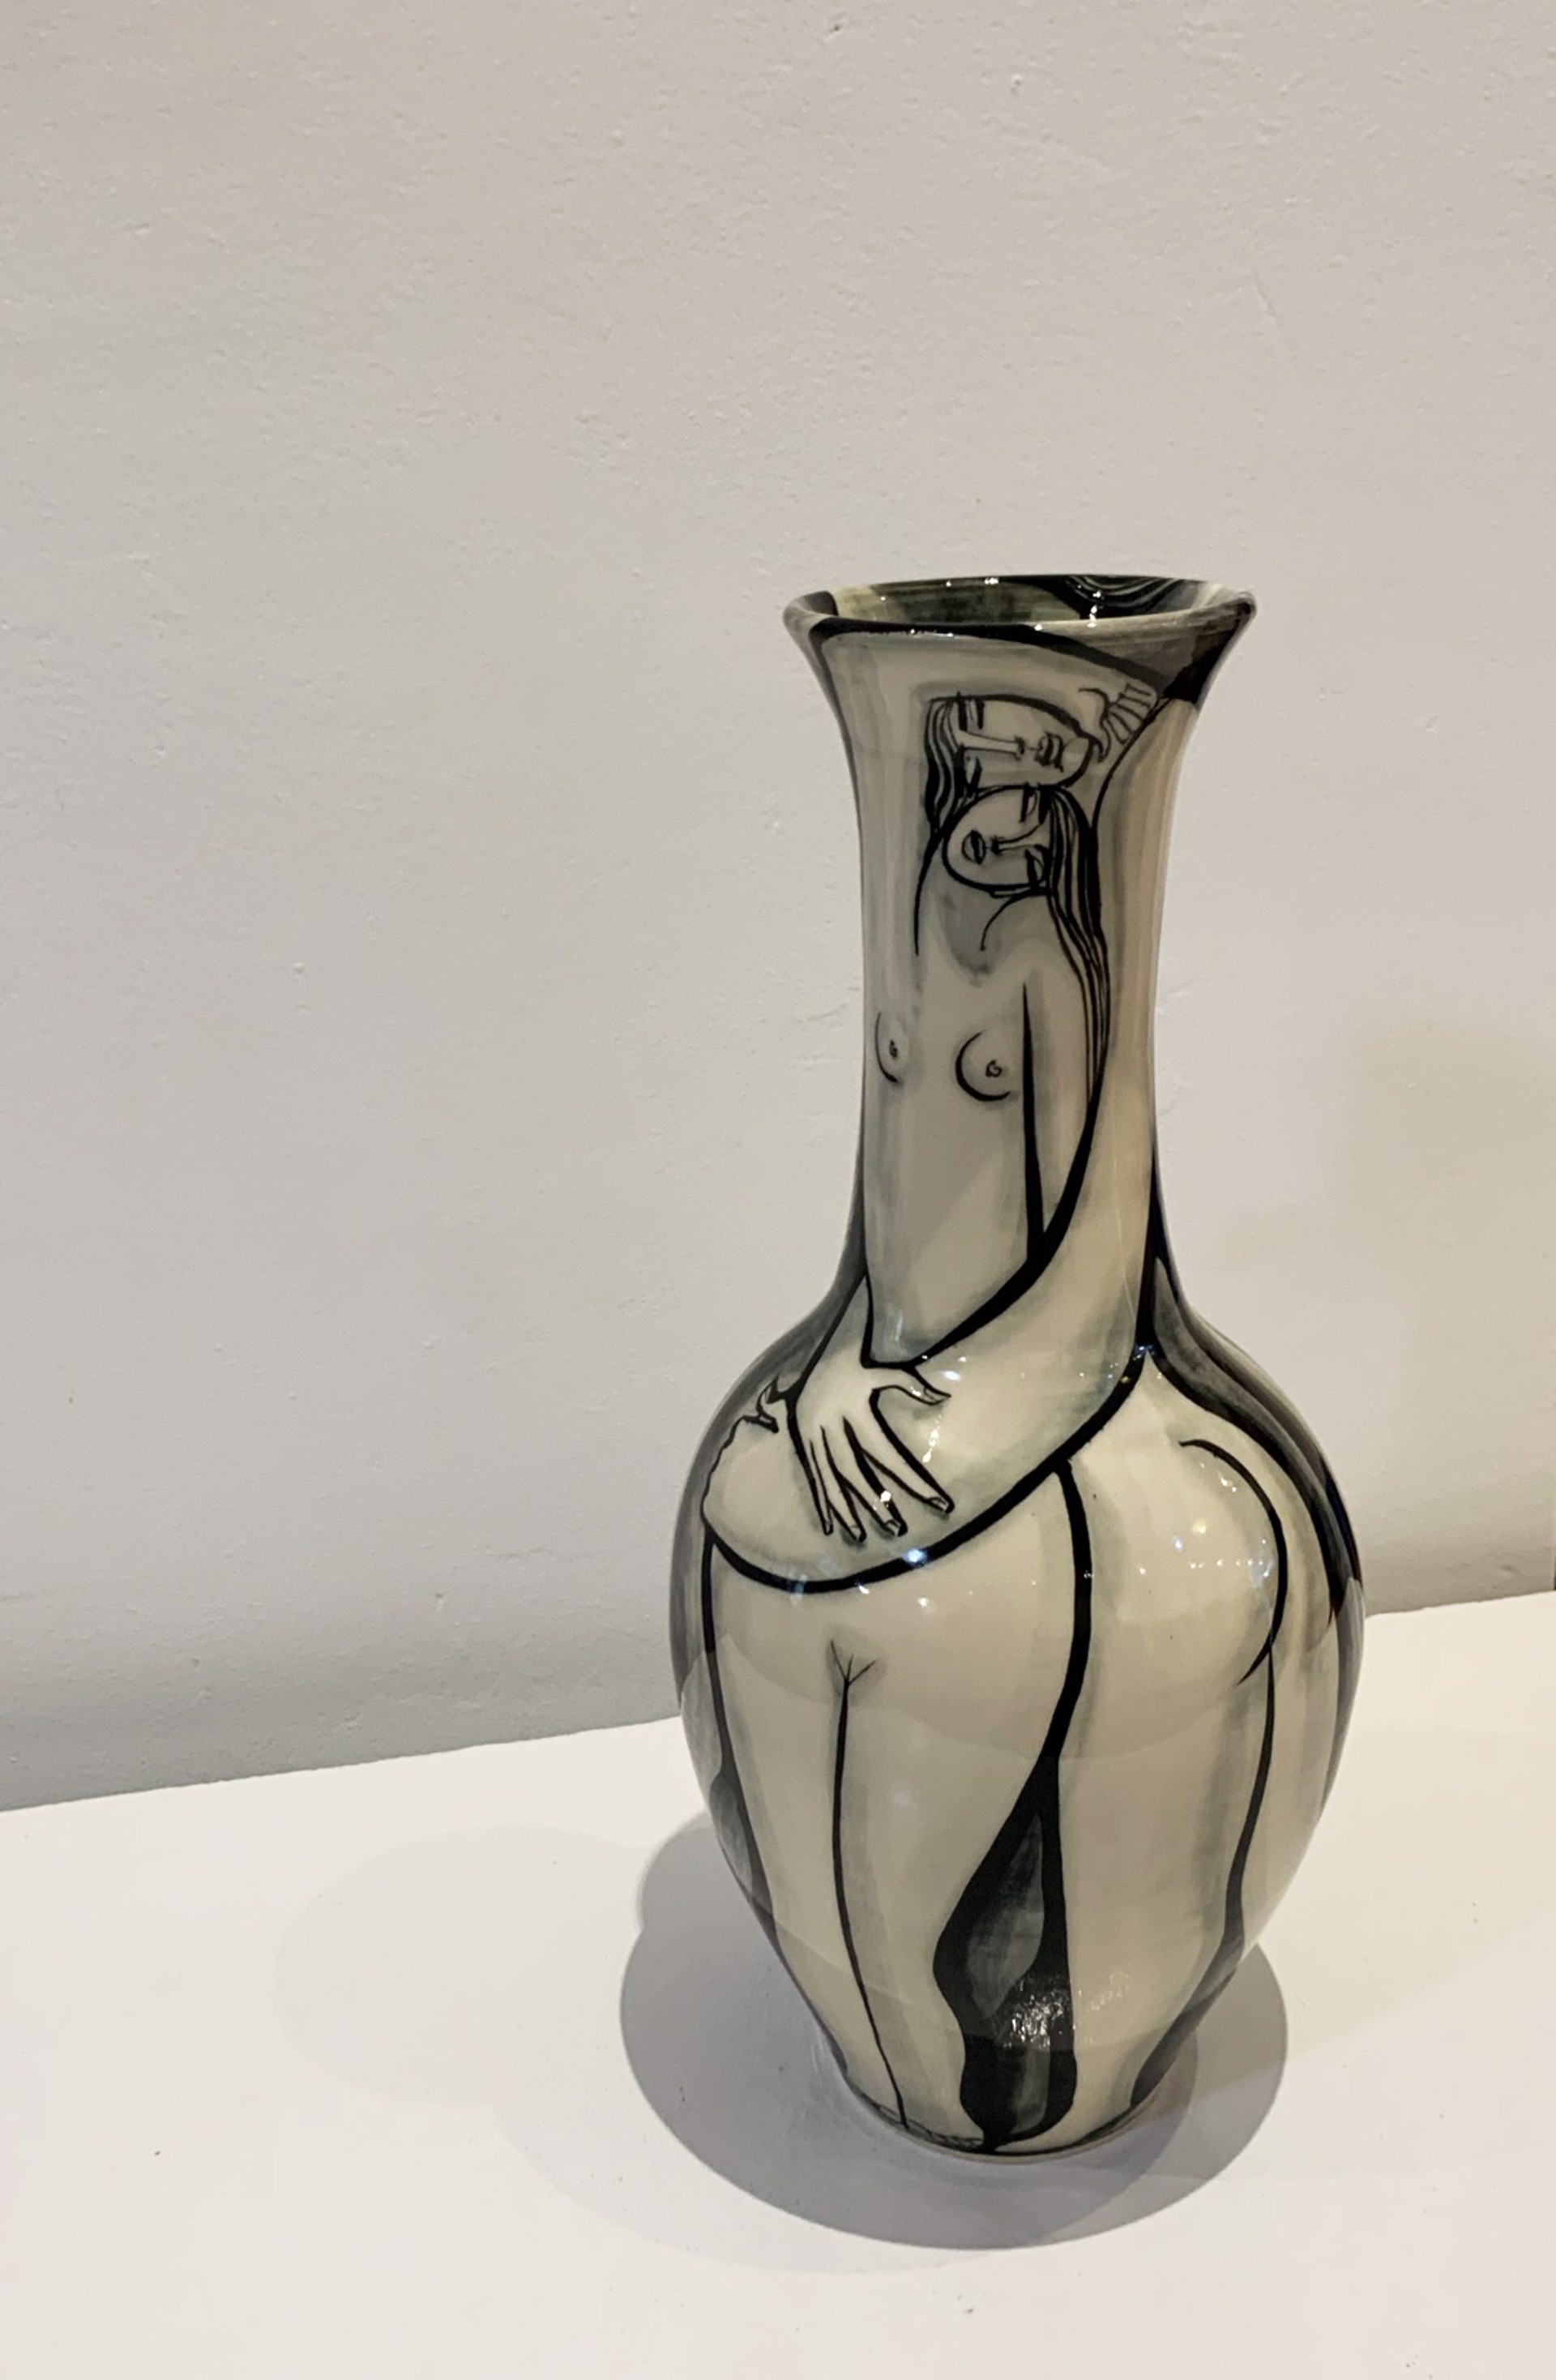 Lovers, Lovers Vase #2 by Ken and Tina Riesterer